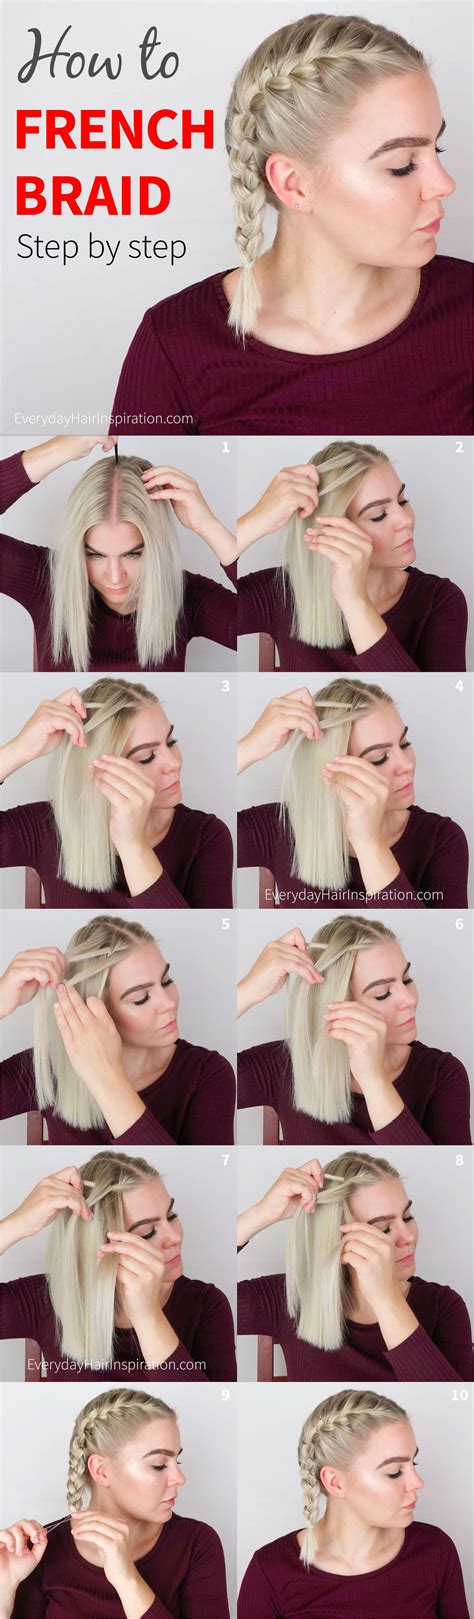 Find the best easy step by step tutorials around! HOW TO FRENCH BRAID YOUR OWN HAIR STEP BY STEP - Everyday Hair inspiration